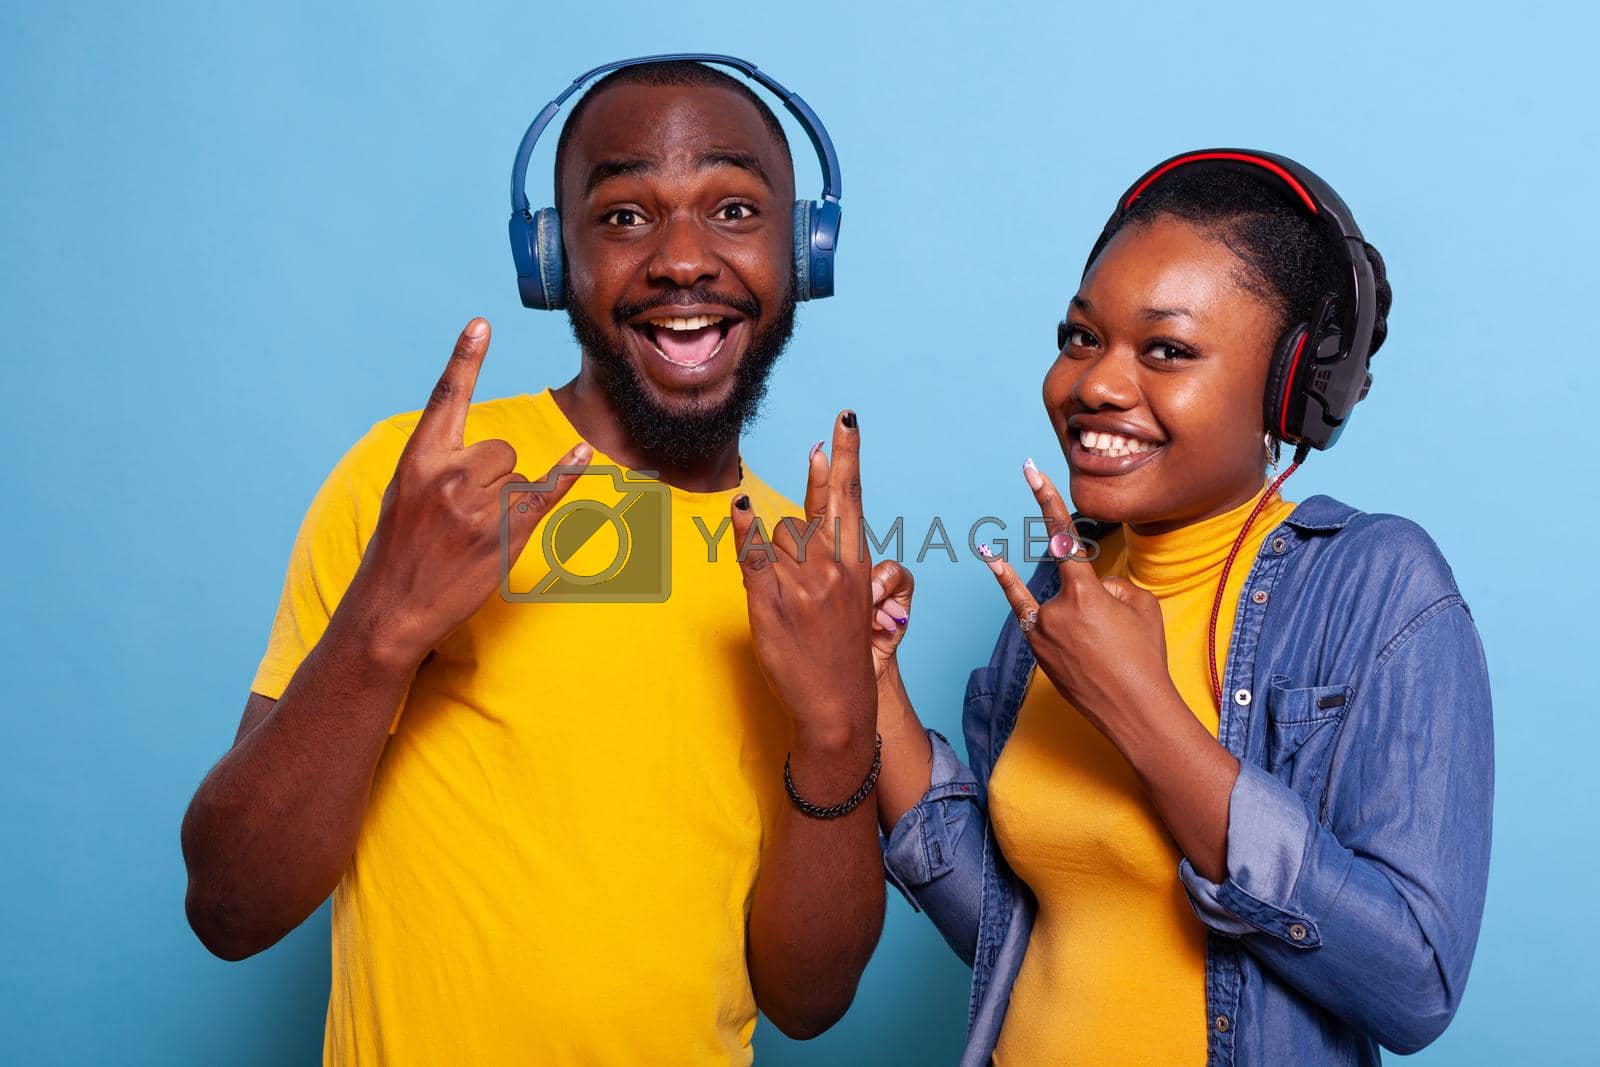 Happy people showing rock symbol with fingers on camera, listening to music on headphones. Playful couple enjoying song and rhythm on headset, doing hands gesture and smiling.